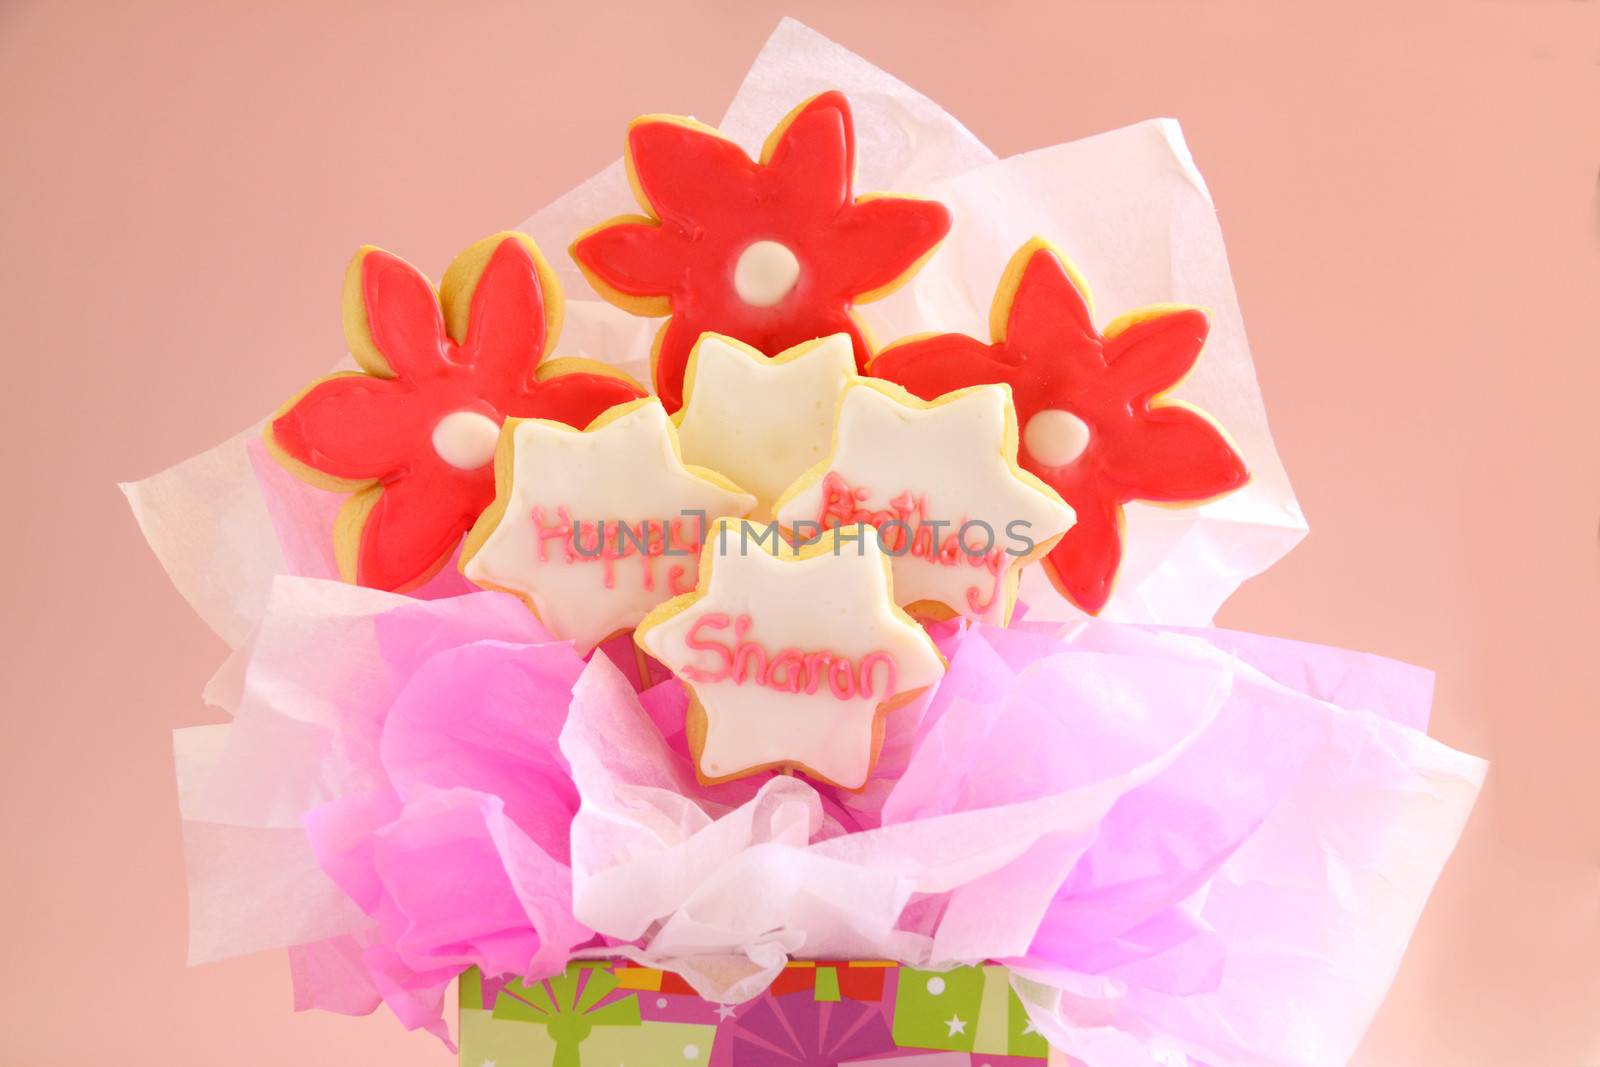 A birthday bouquet made from iced cookies on sticks and gift wrapped.